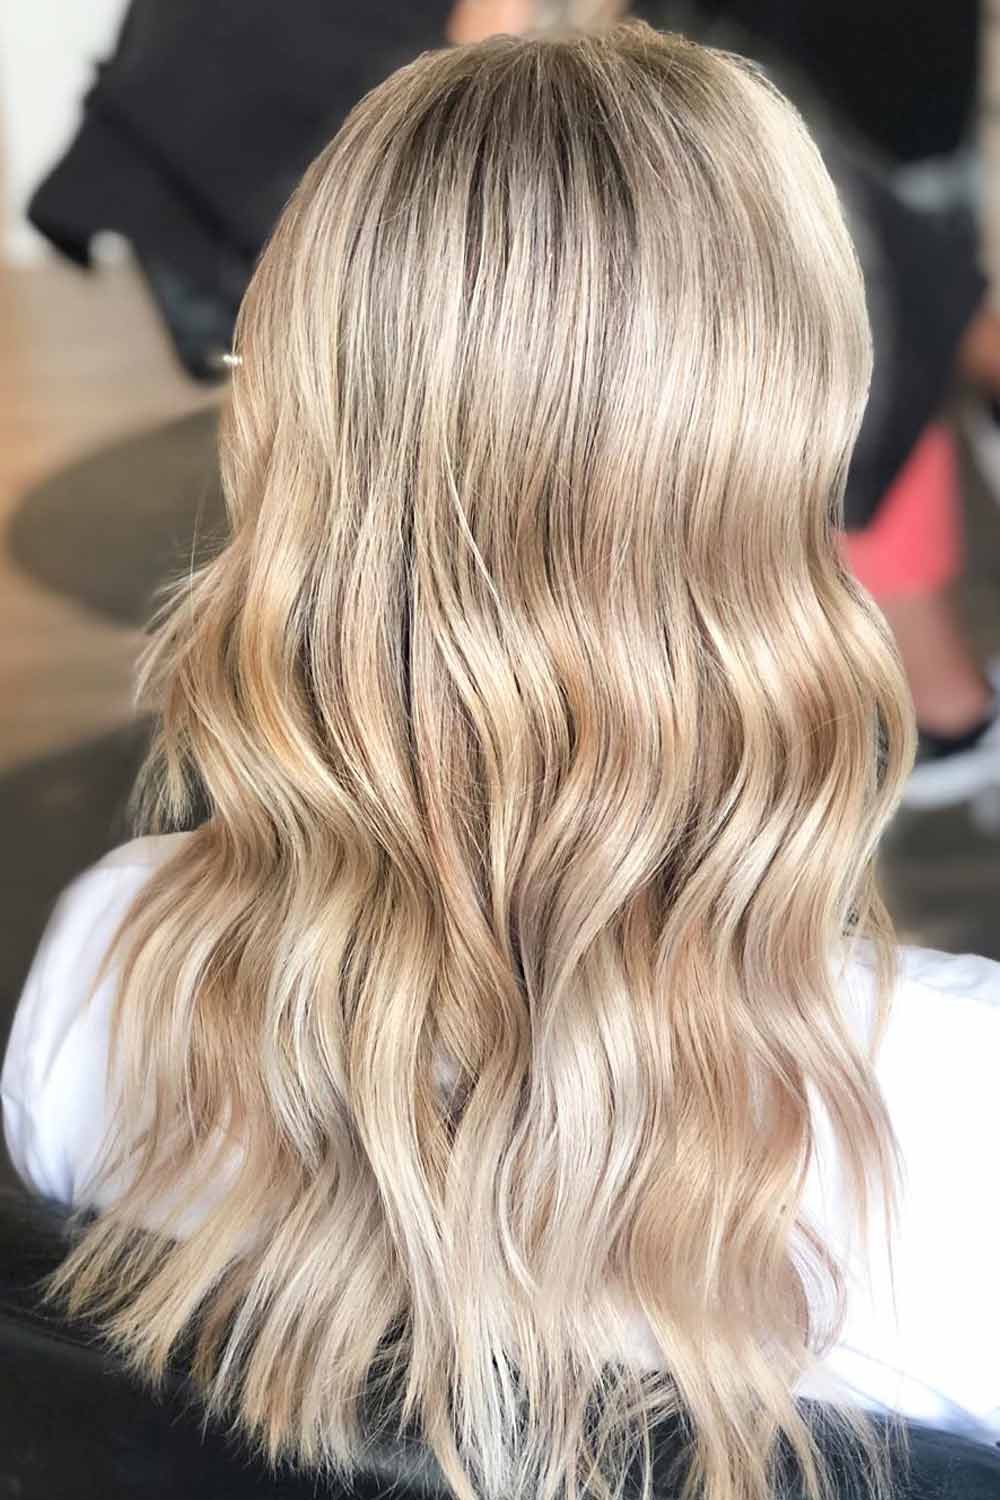 Buttery Blonde Hair #blondehair #blondehaircolor #blonde